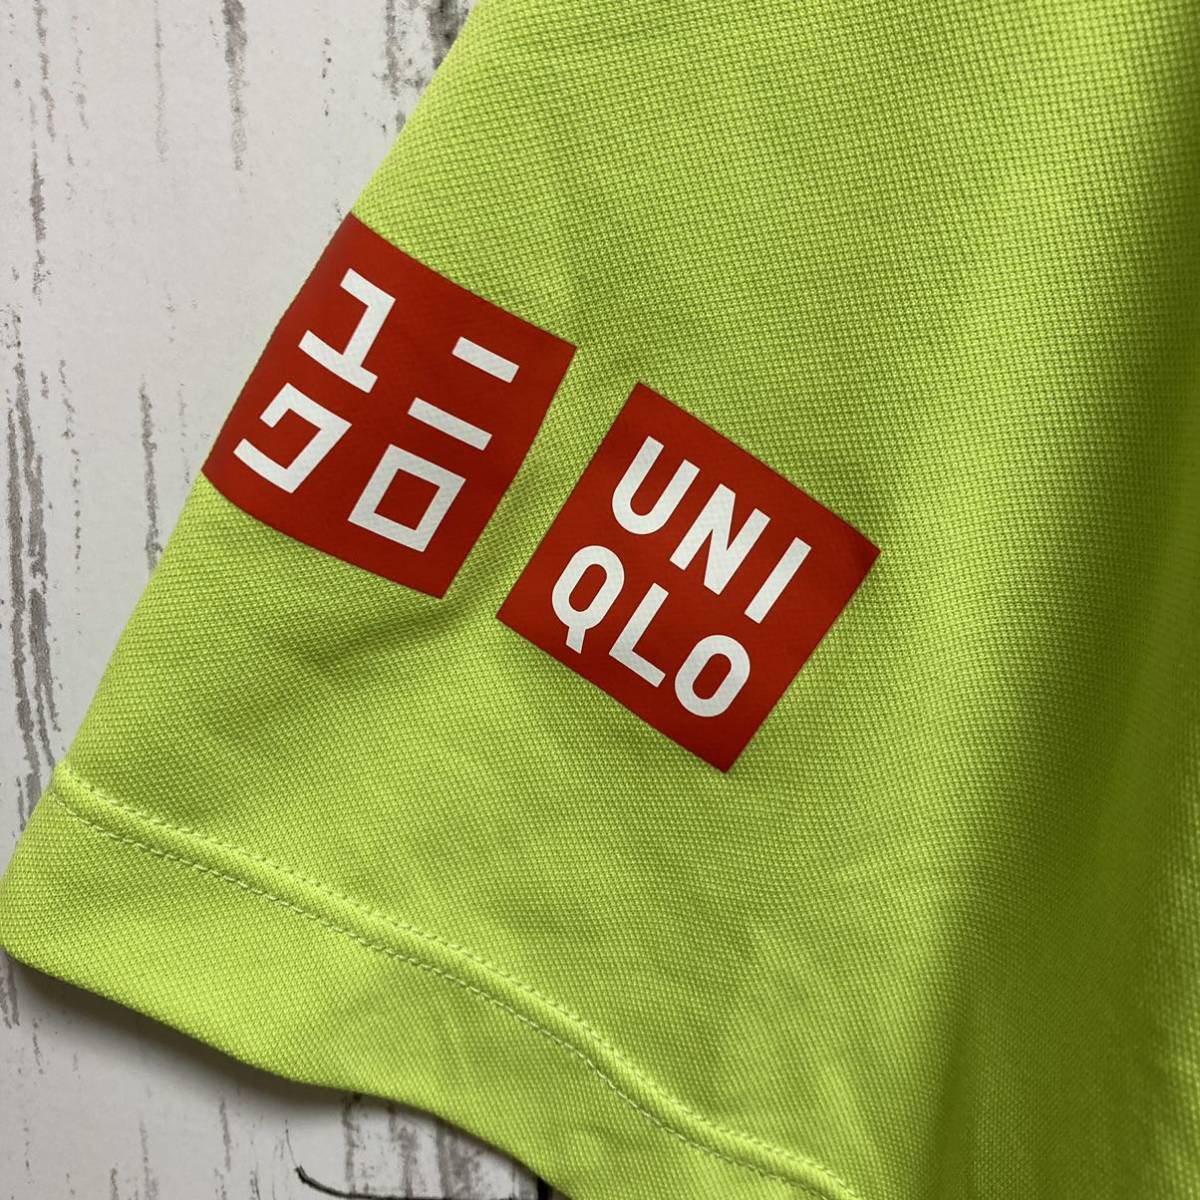 [UNIQULO] Uniqlo tennis short sleeves shirt M size . woven . player have on 2015 Barcelona * open yellow green free shipping!